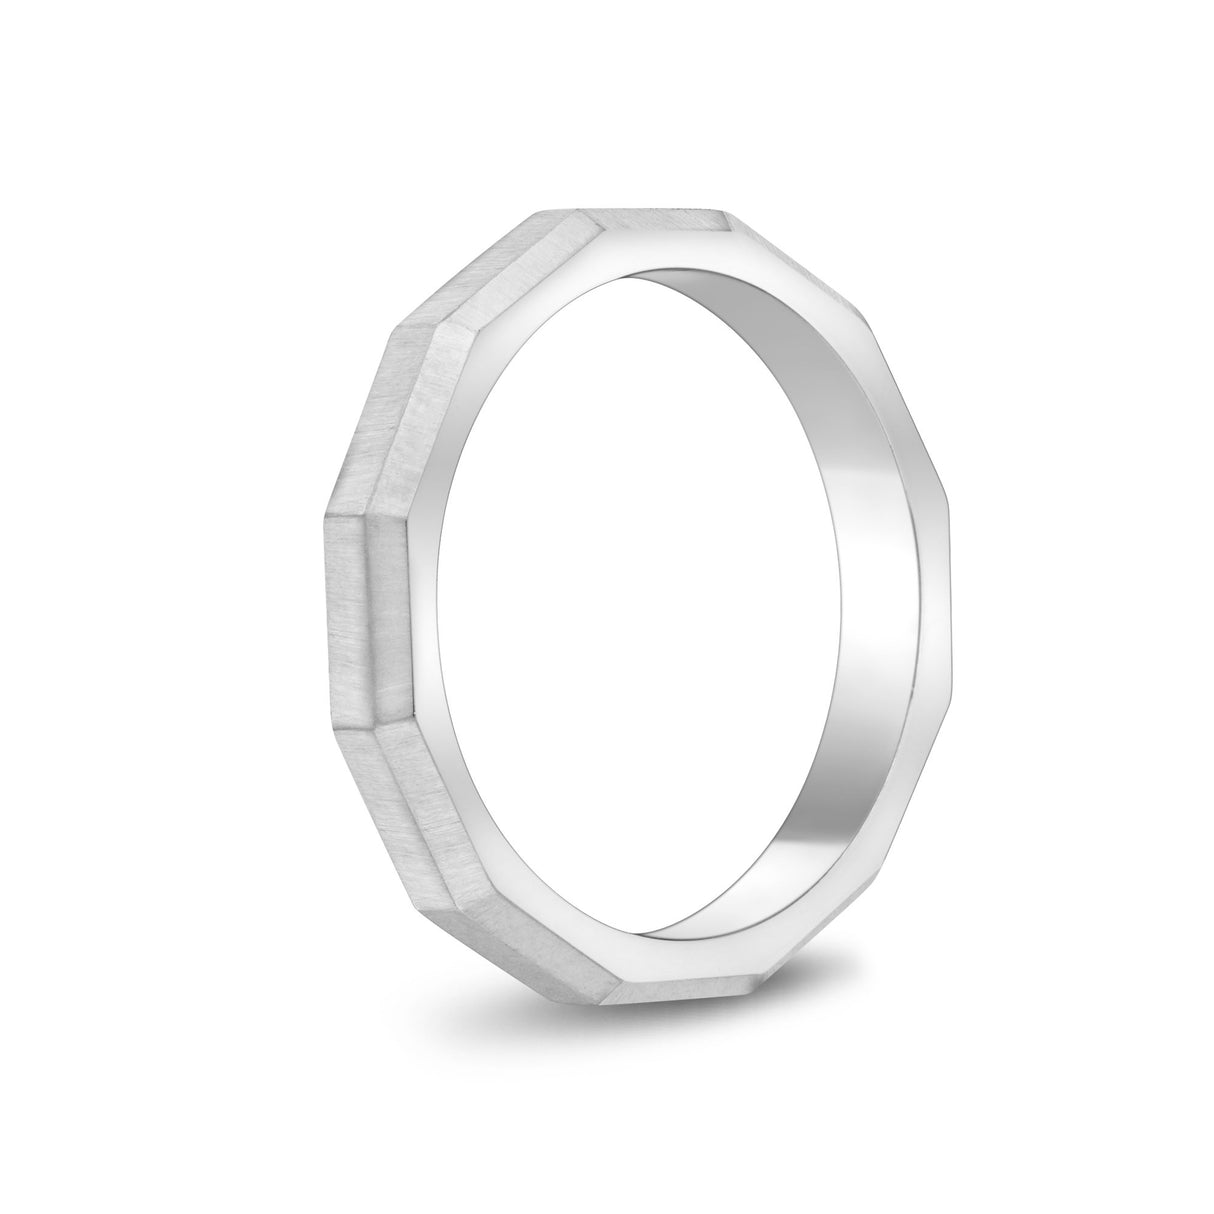 Unisex Ring - 3mm Faceted Matte Steel Unisex Engravable Band Ring